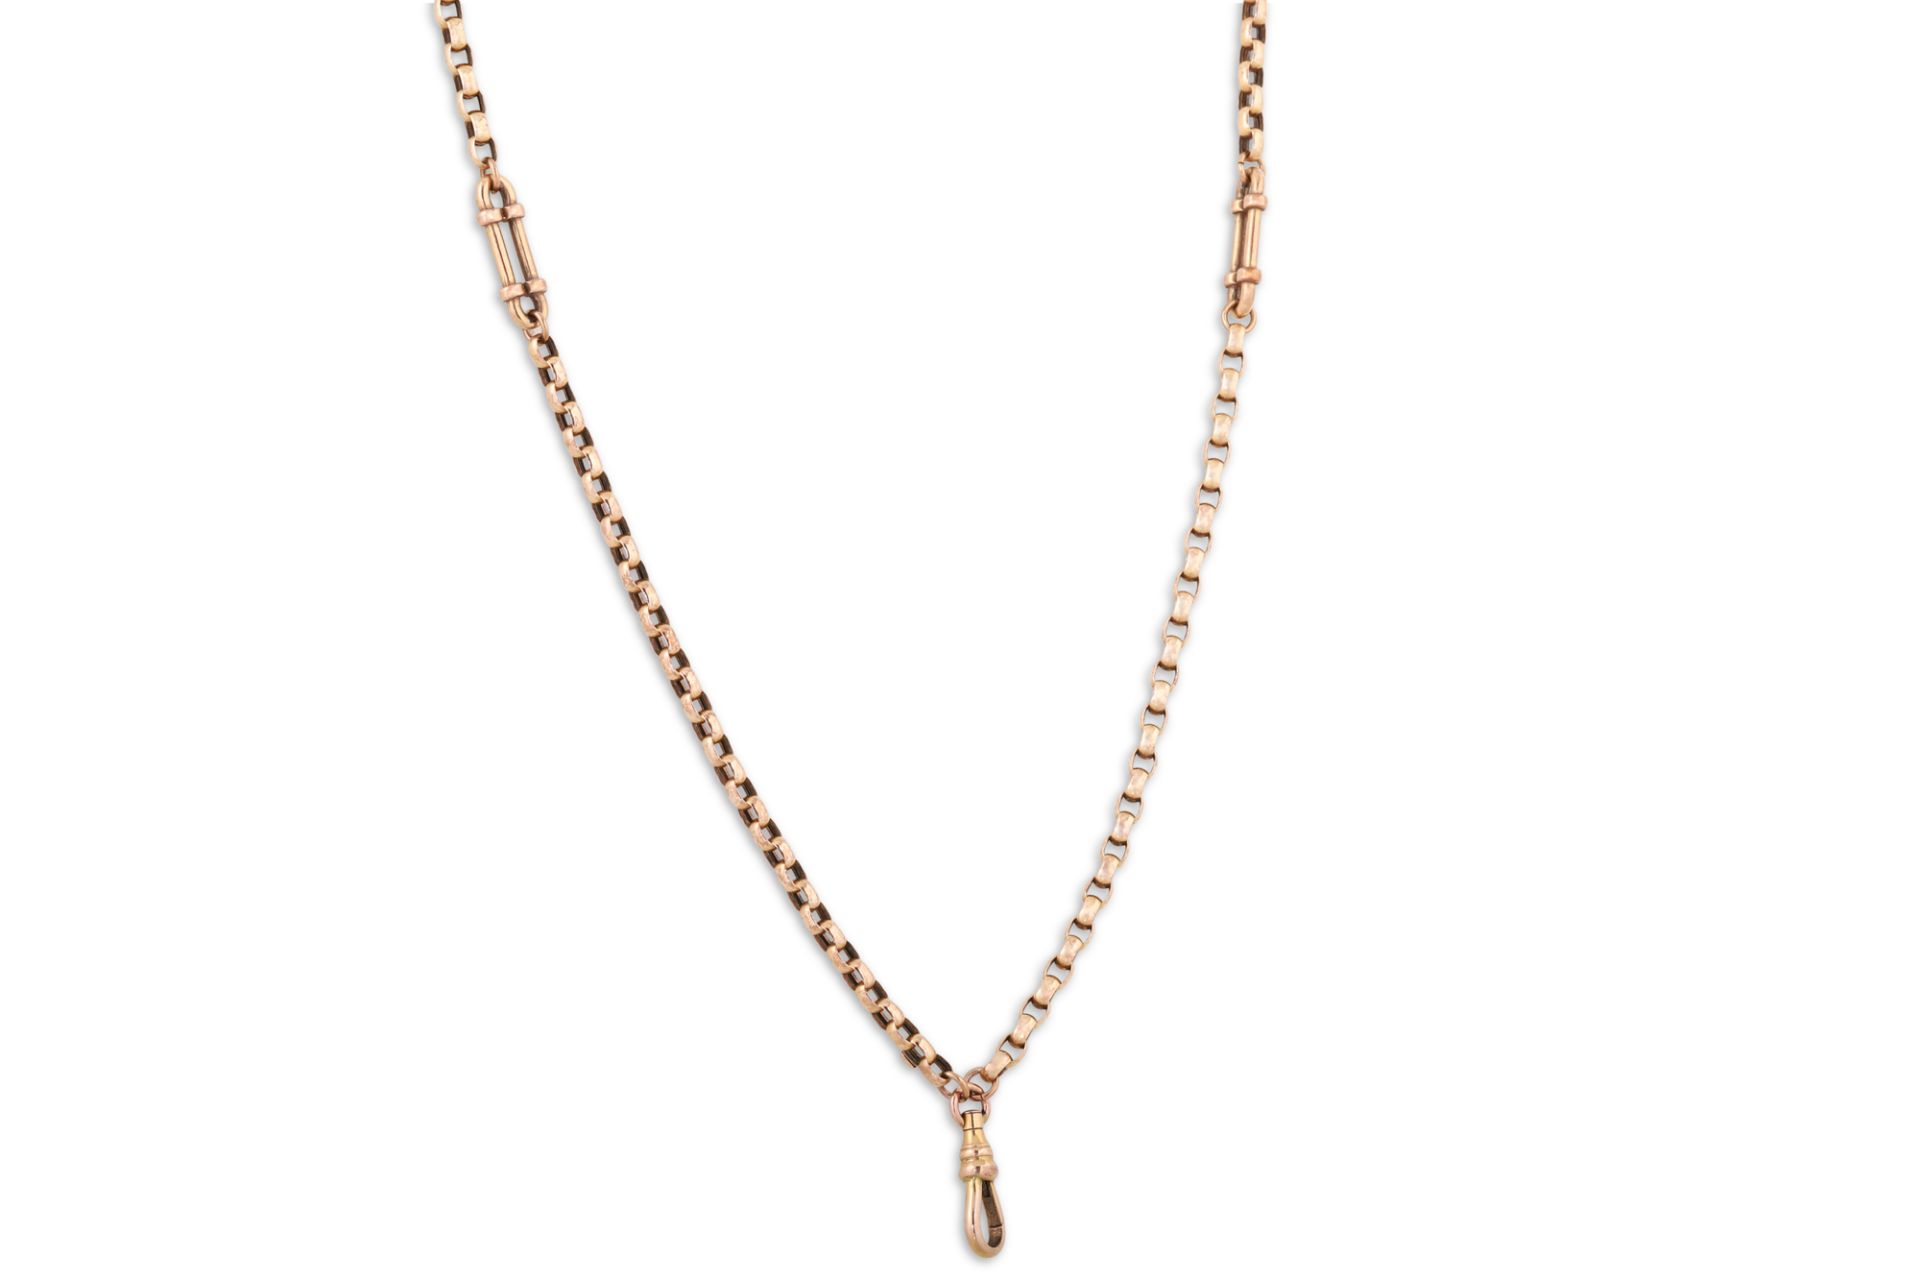 A VINTAGE 9CT ROSE GOLD BELCHER LINK NECK CHAIN, with two trombone link spacers, 29" long & 18.3 g.